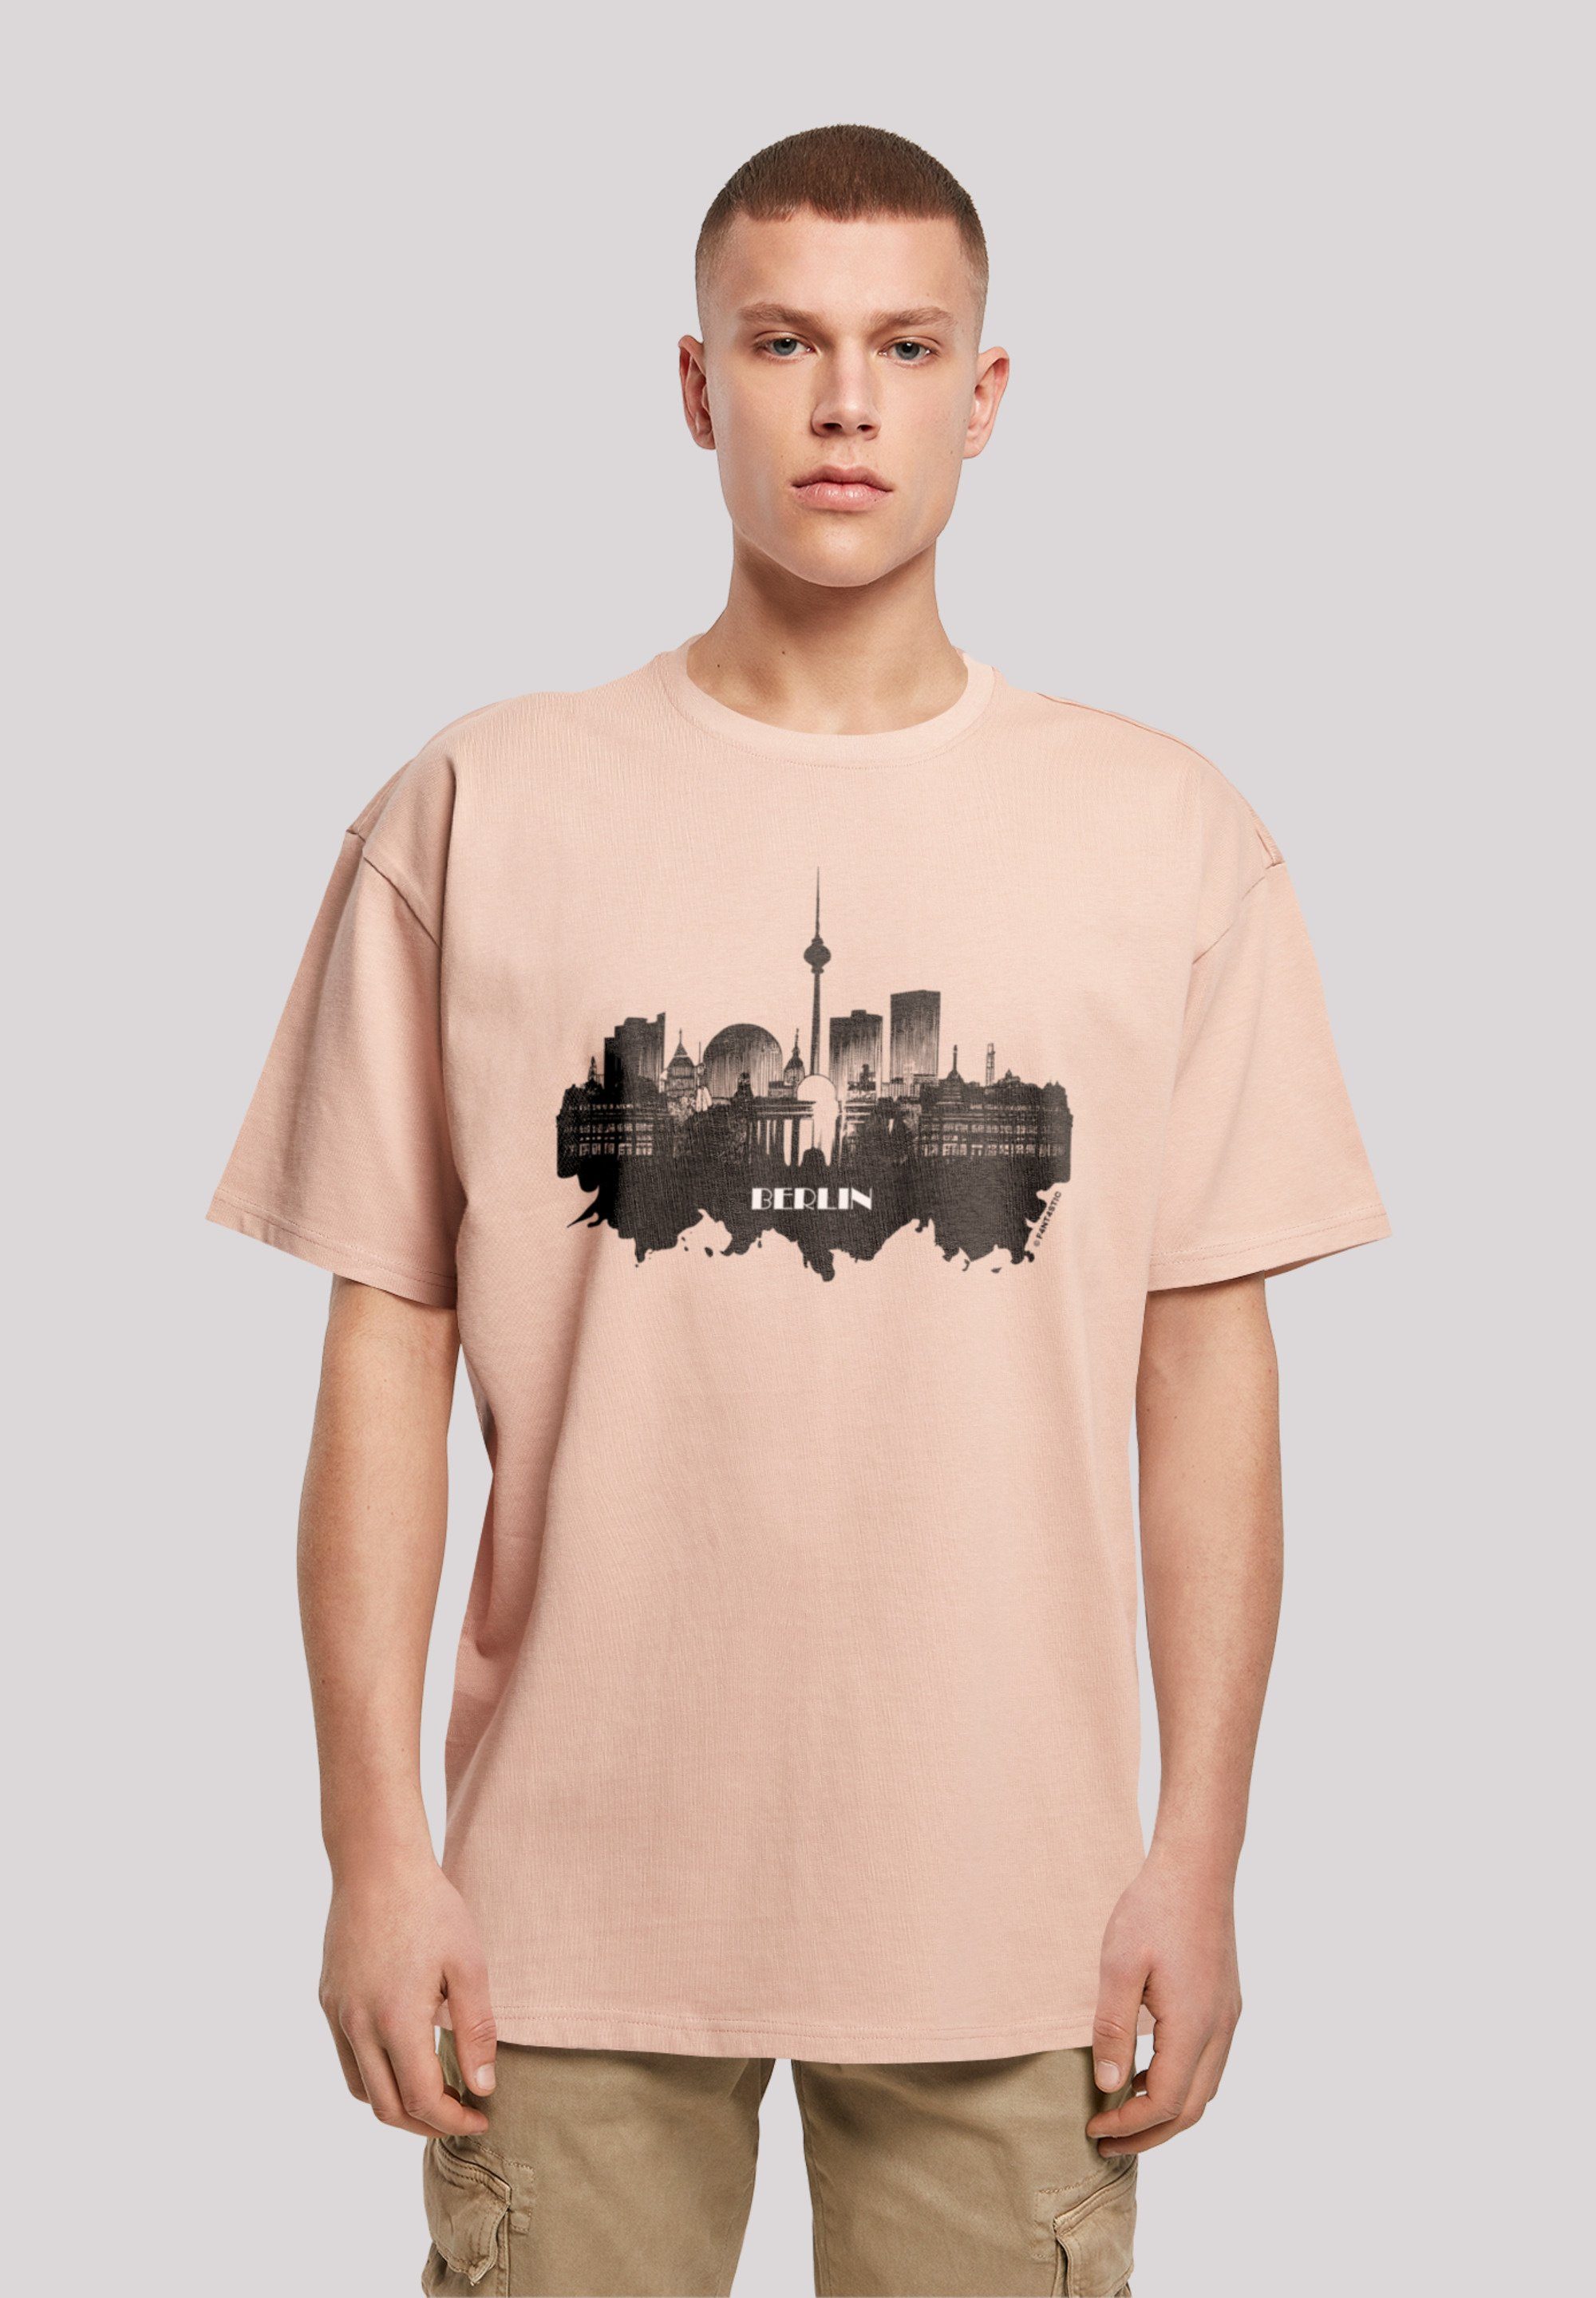 F4NT4STIC T-Shirt Cities Collection - Berlin skyline Print amber | T-Shirts